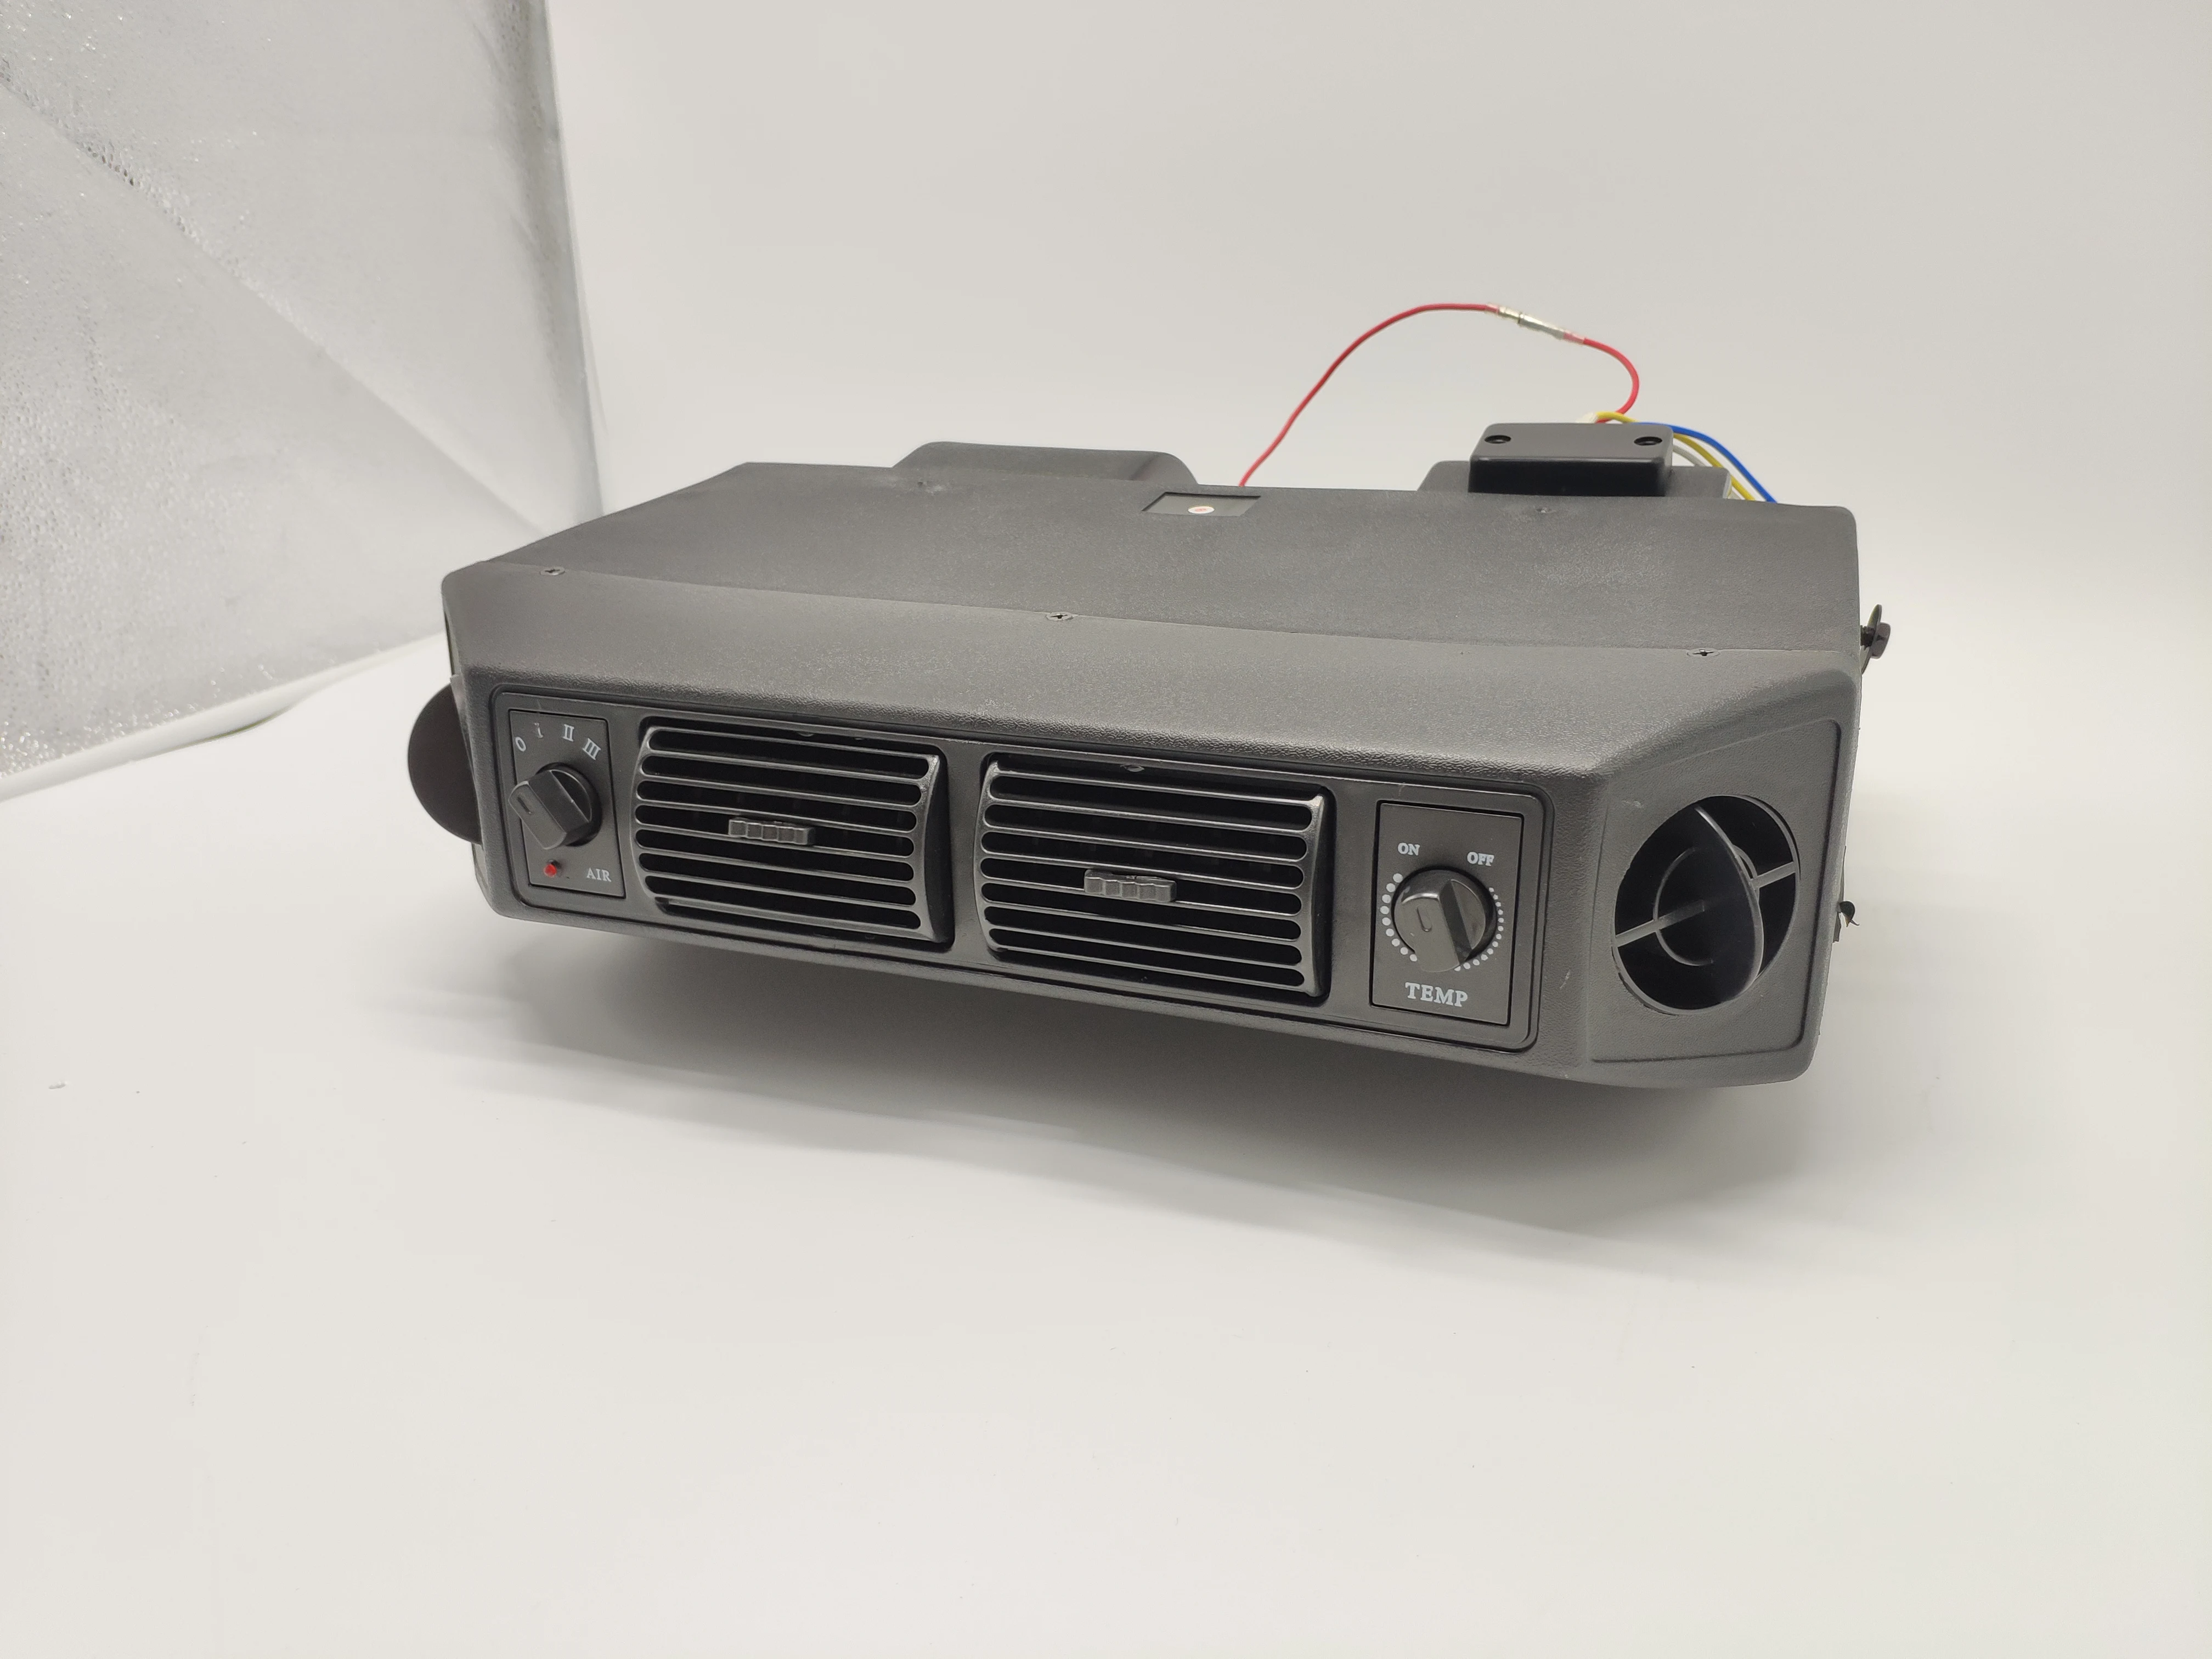 

404-100 PP Material Universal Modified 3 Speed Car Air Conditioner A/C12V Evaporator Assembly